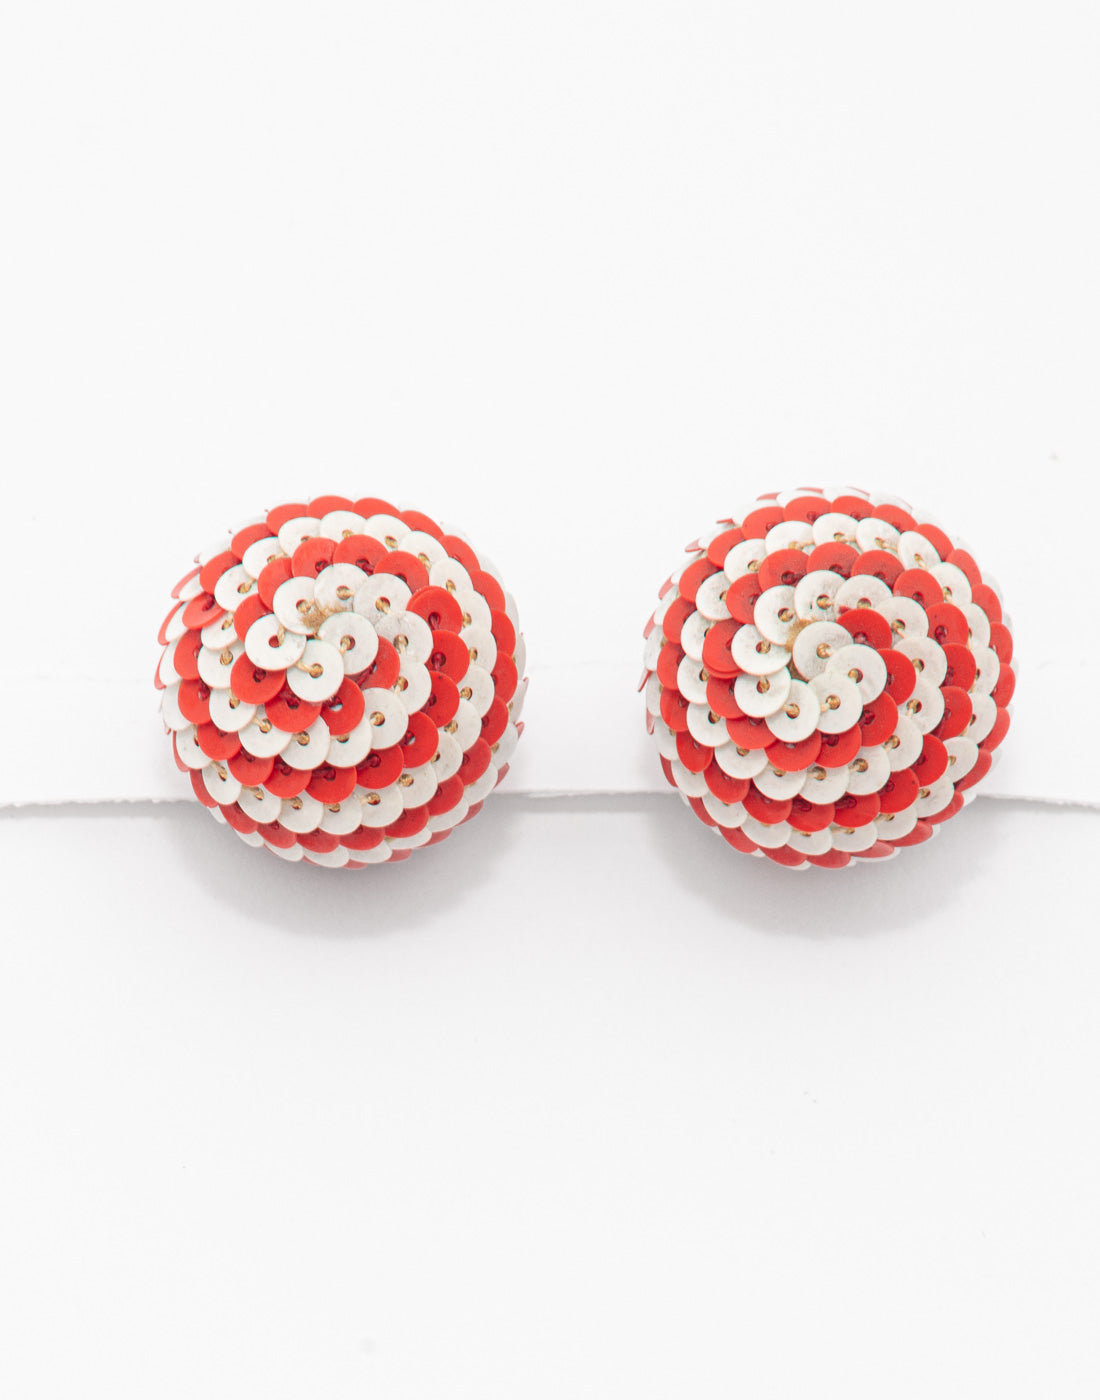 Vintage red and white ball earrings made of paillettes